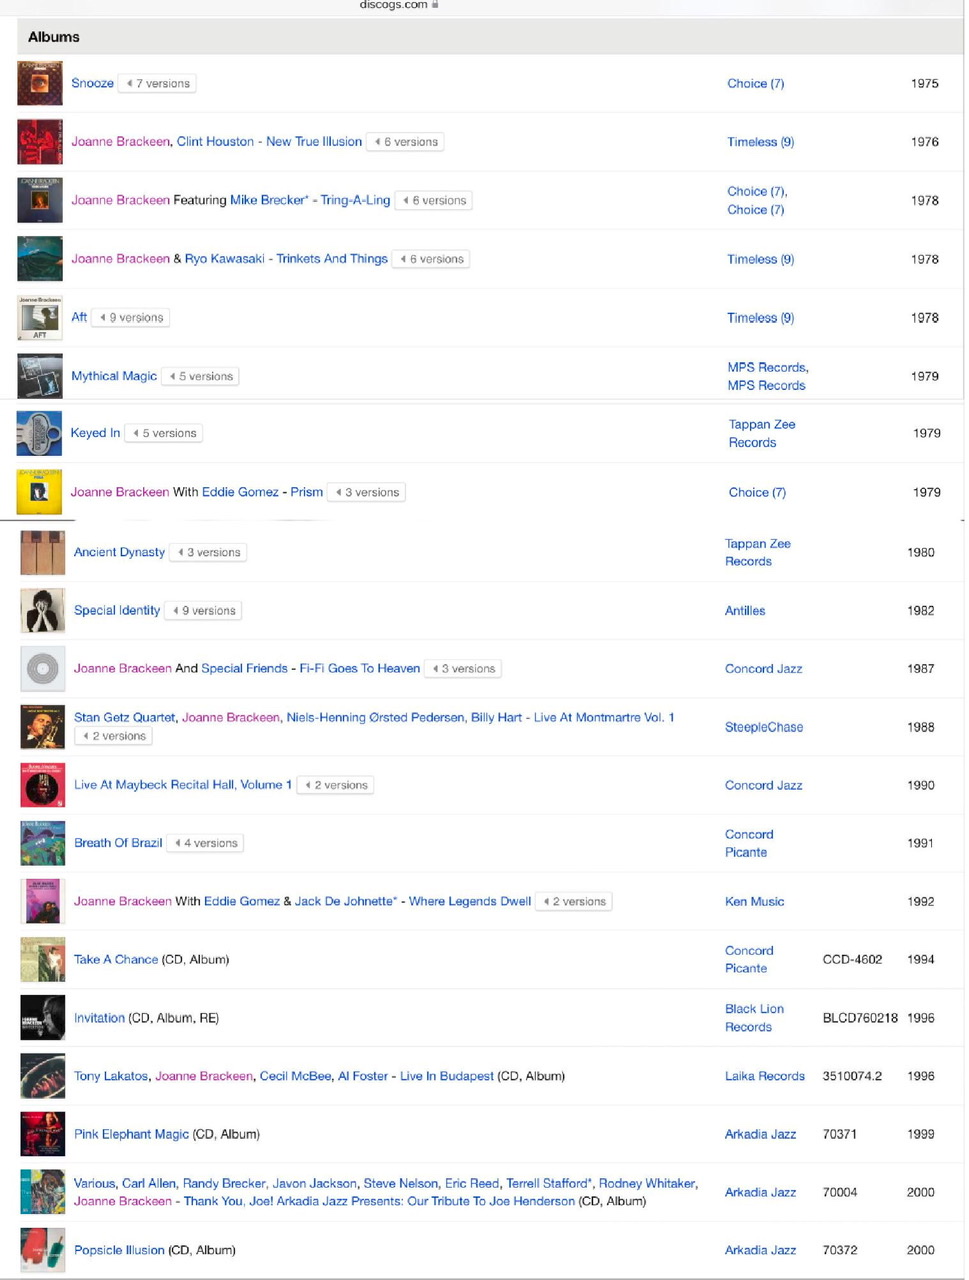 A color graphic of twenty-one album covers of the music of Joanne Brackeen with titles and dates of release from discogs.com.